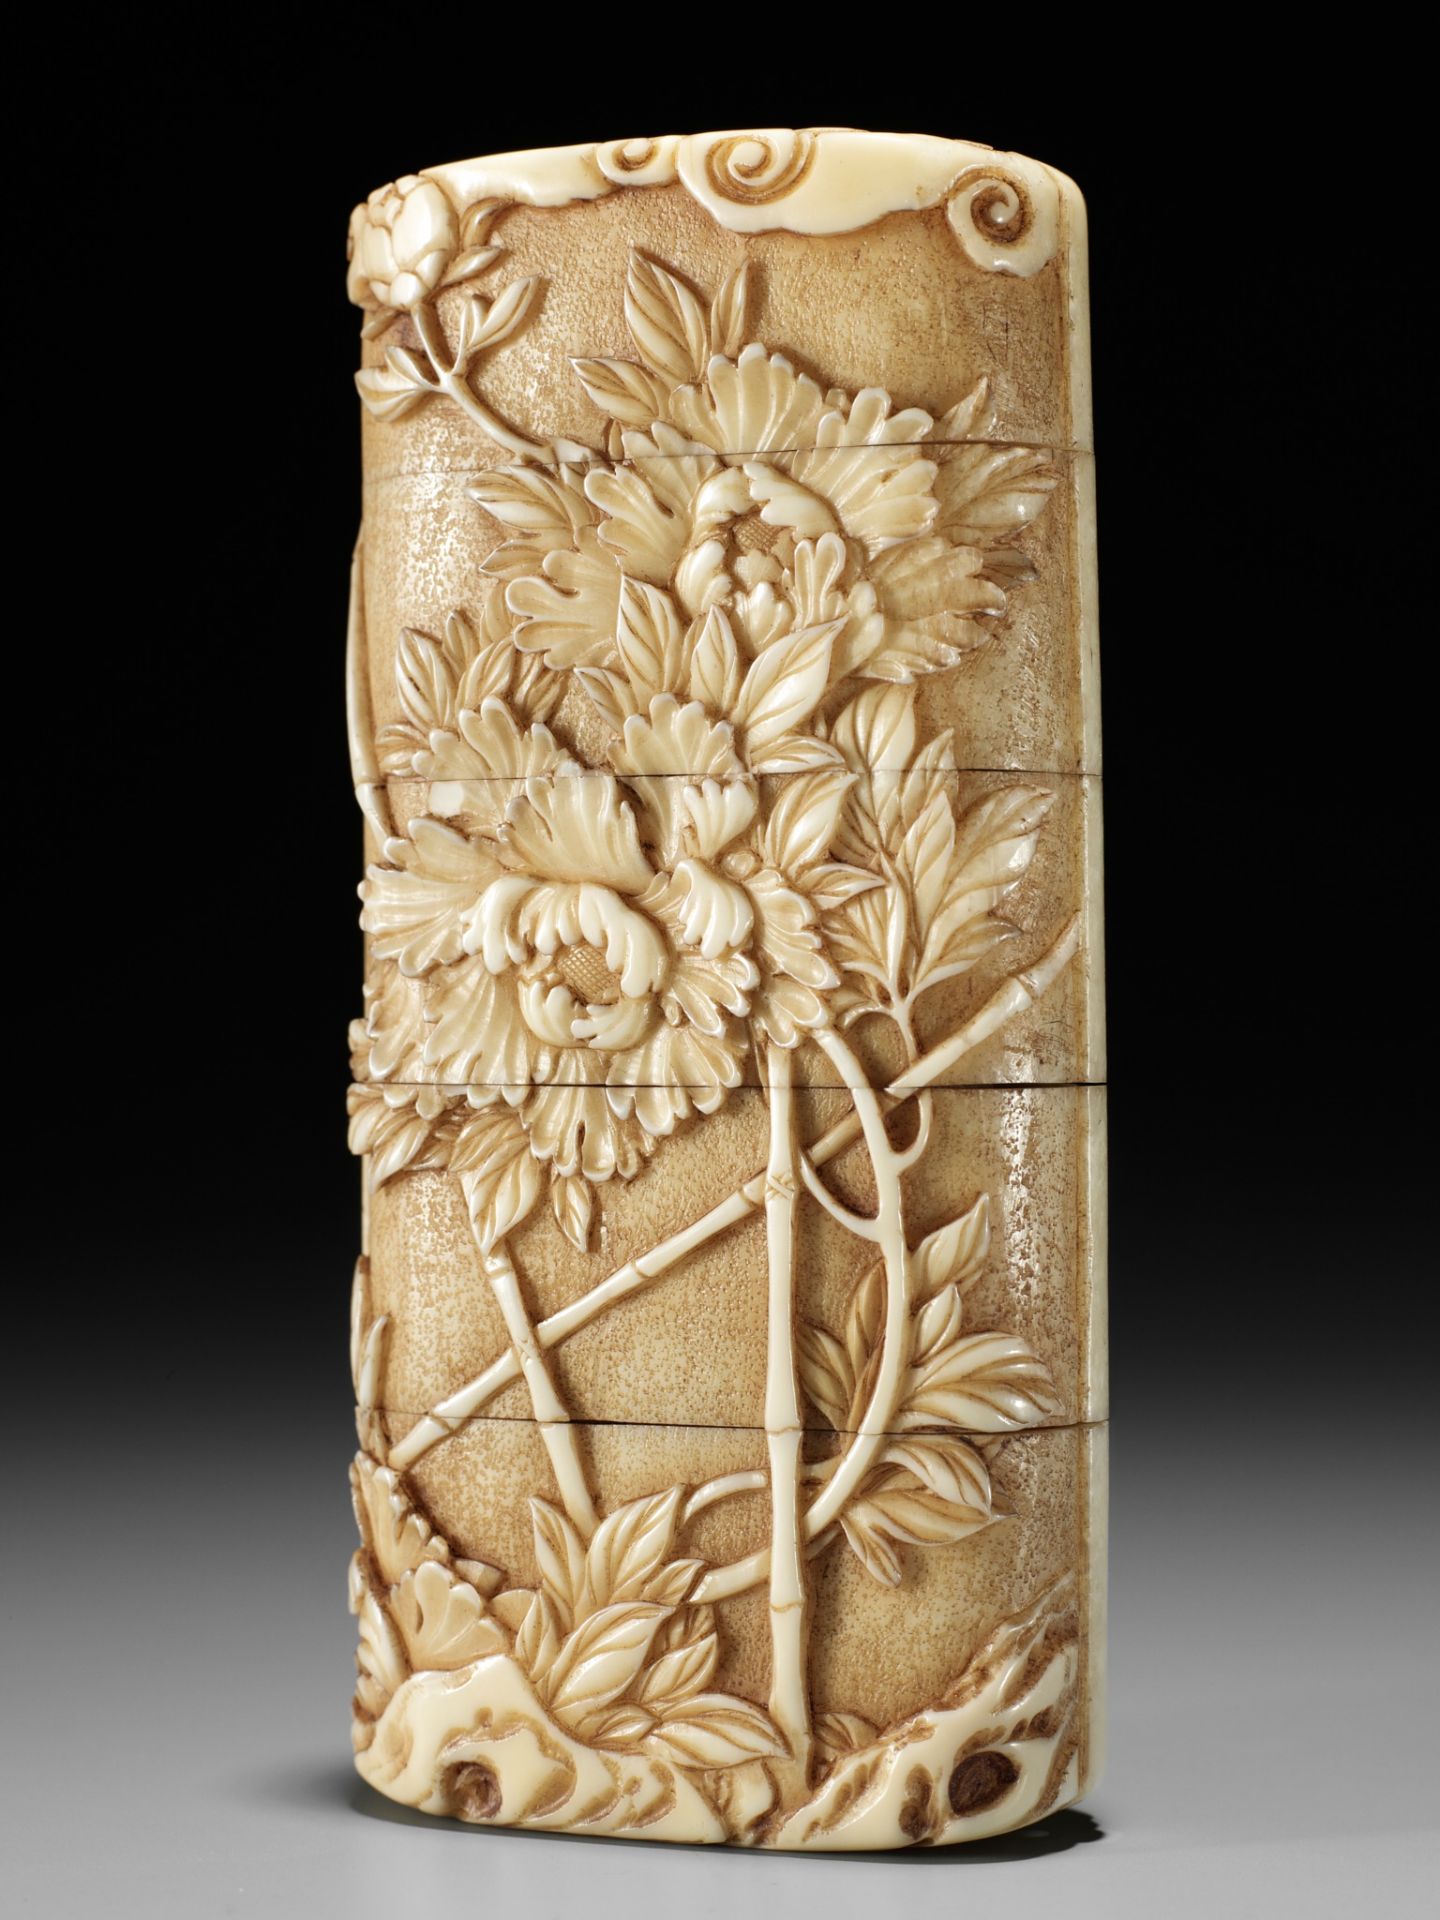 A MASTERFUL WALRUS TUSK FOUR-CASE INRO DEPICTING A SWALLOW AMONGST FLOWERS - Image 2 of 12